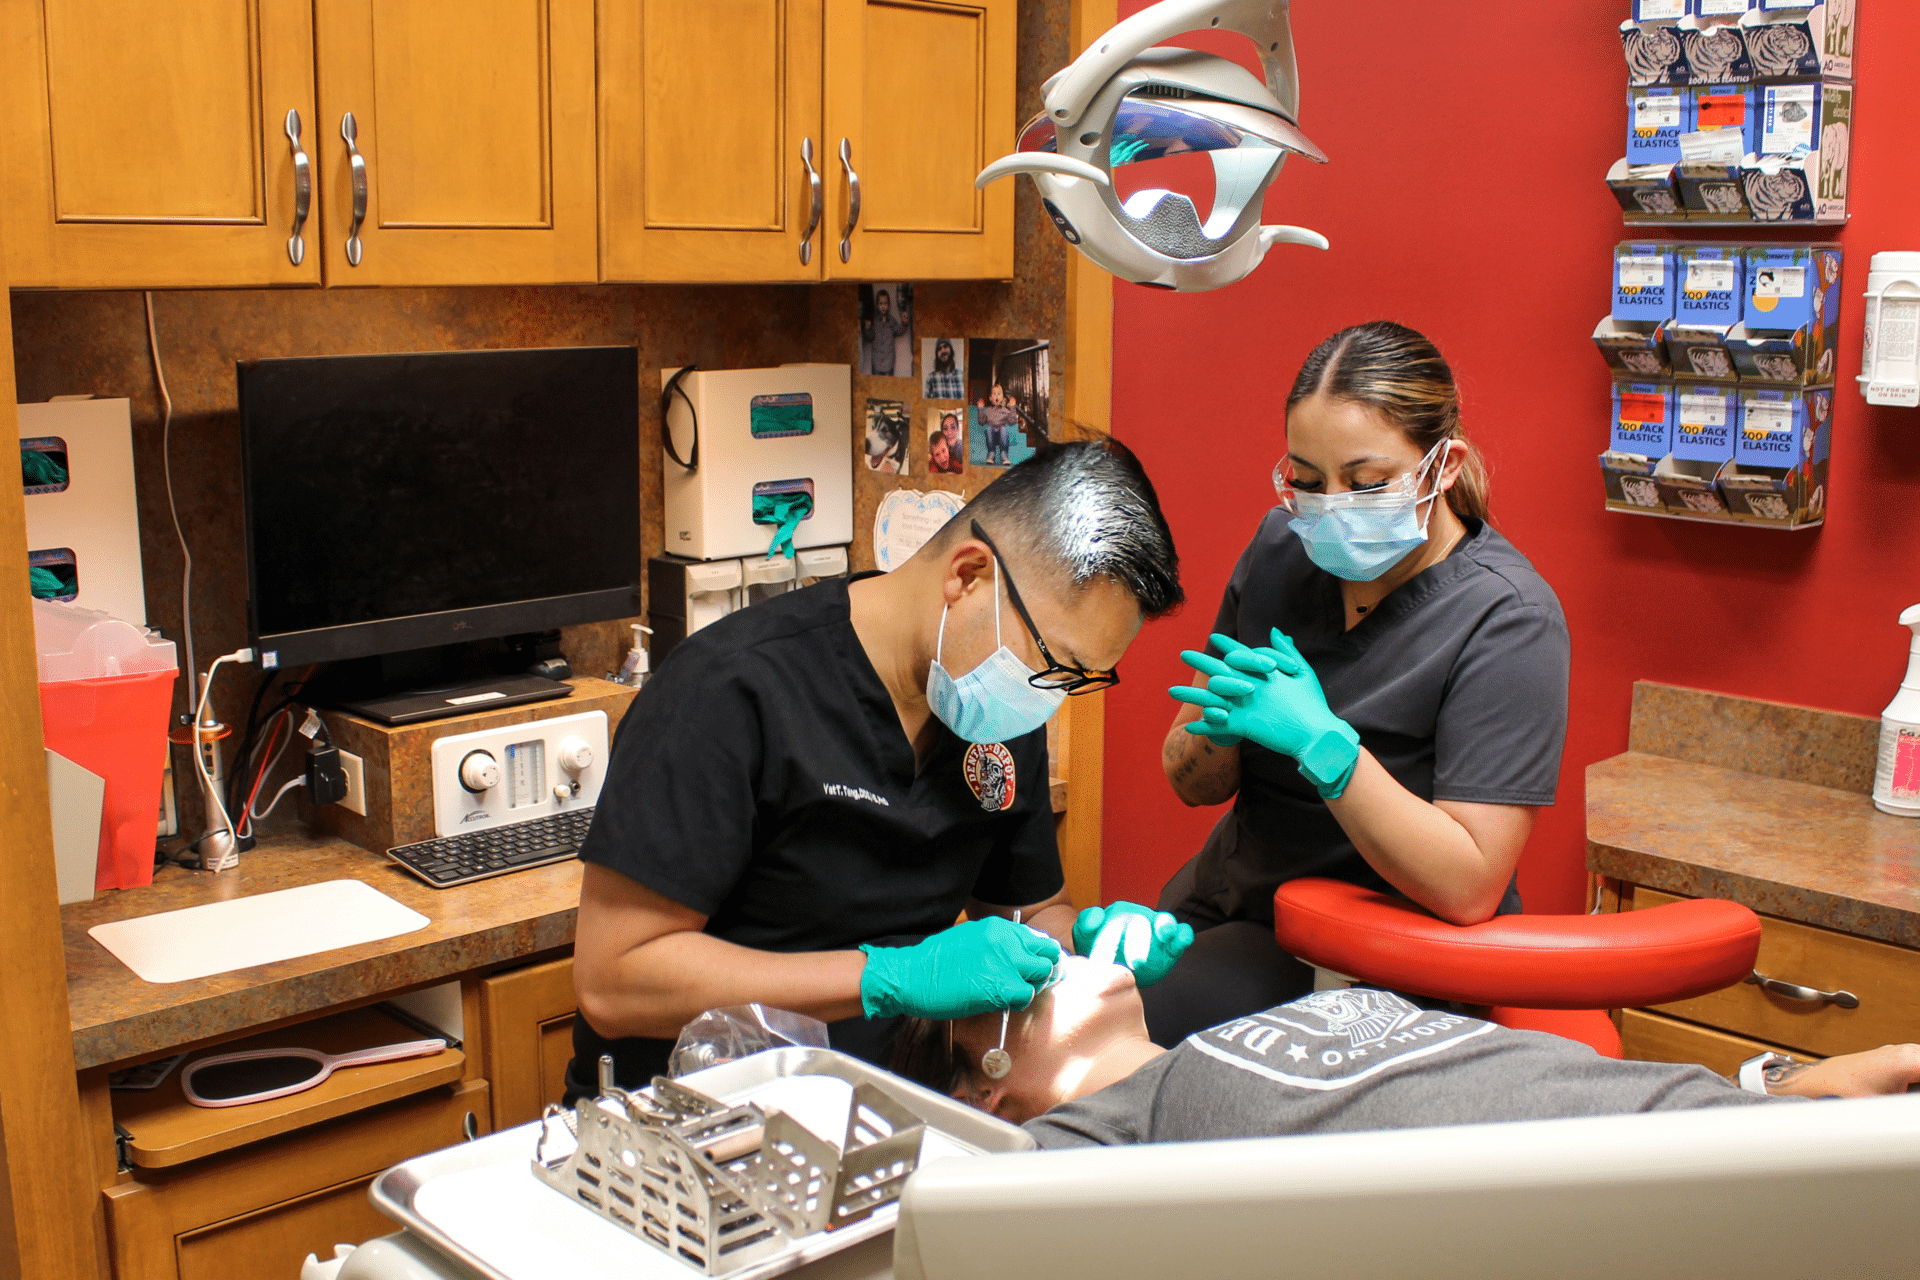 Dental Depot dentists examine a patient in a red exam room.